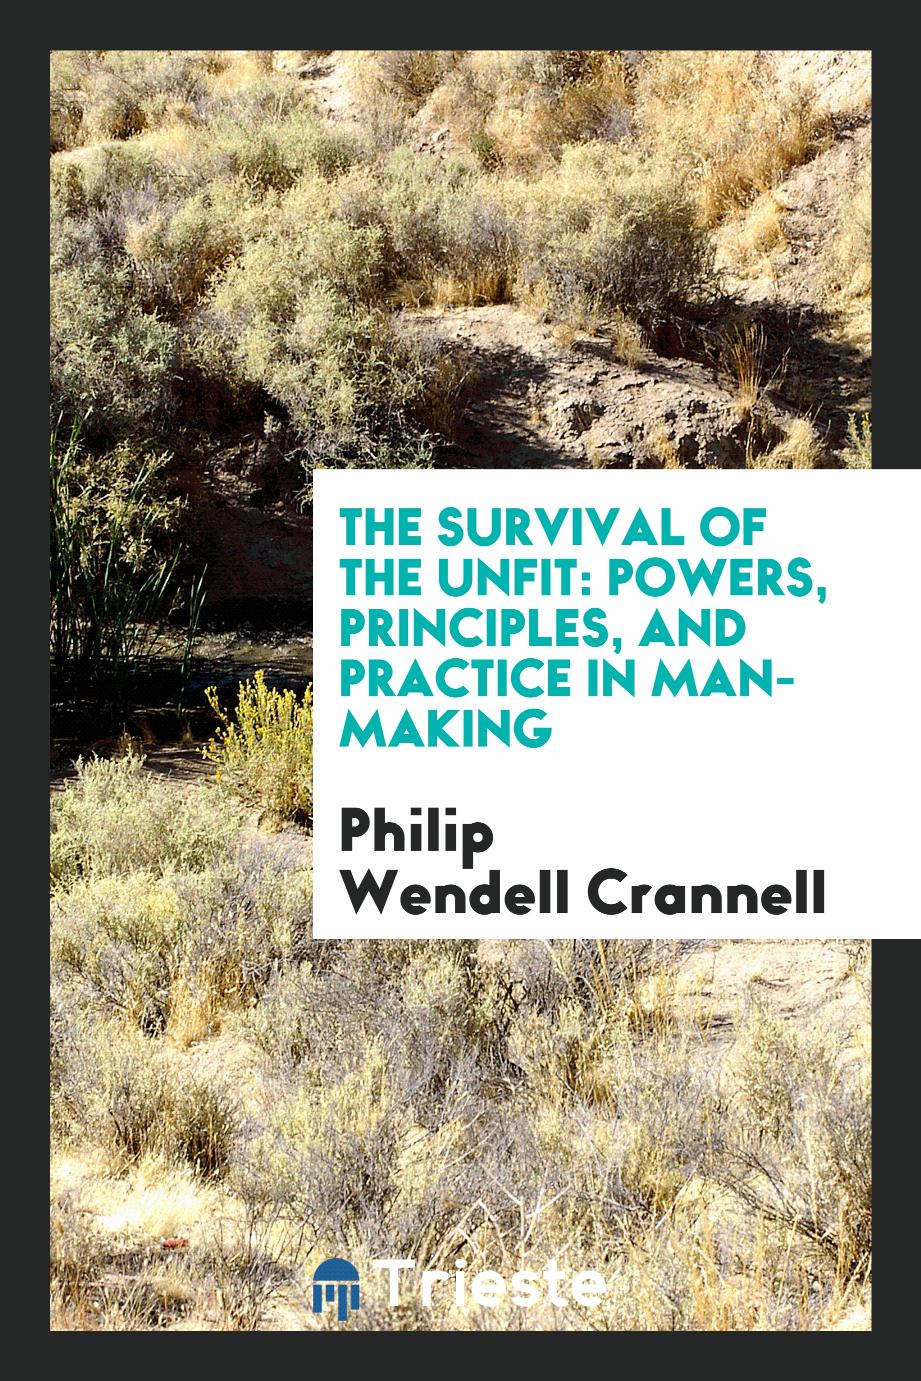 The survival of the unfit: powers, principles, and practice in man-making